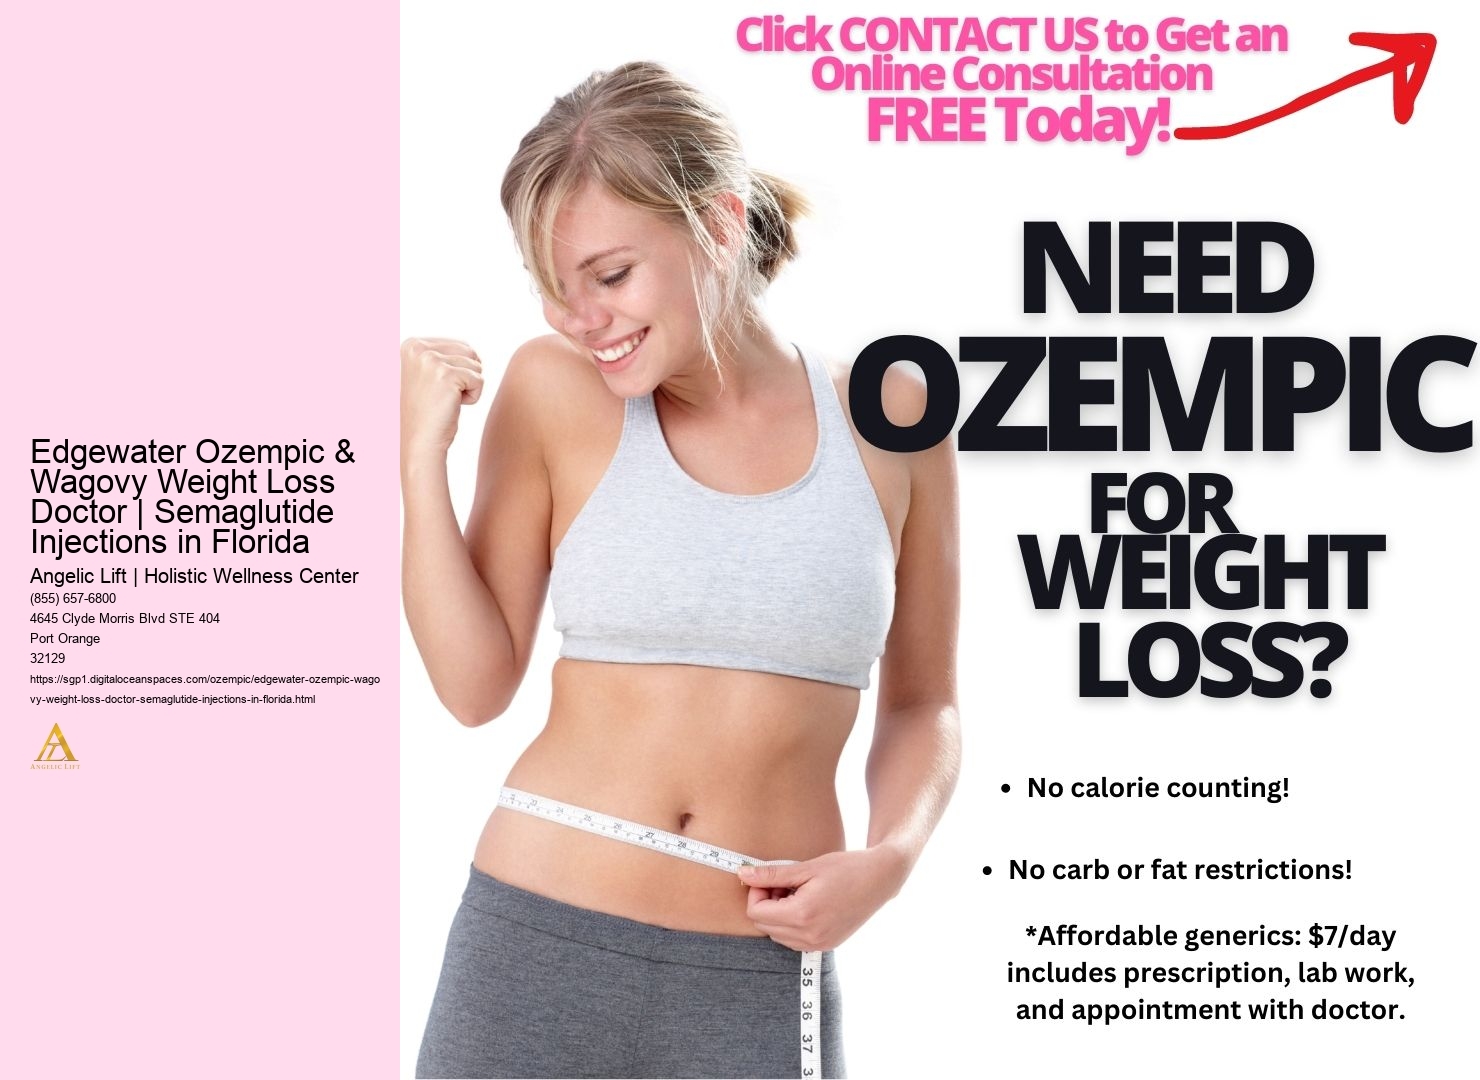 Edgewater Ozempic & Wagovy Weight Loss Doctor | Semaglutide Injections in Florida